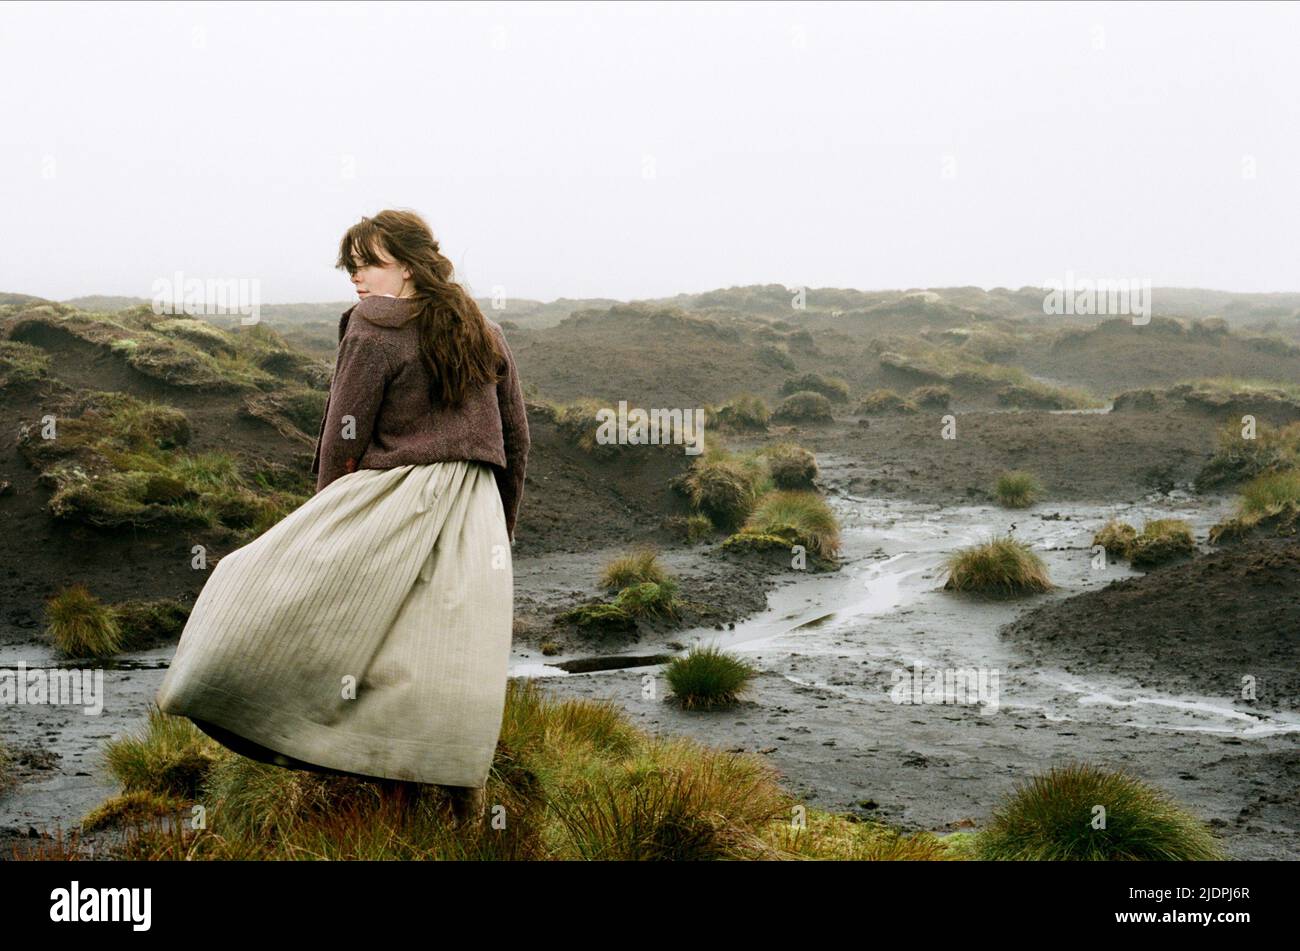 SHANNON BIER, WUTHERING HEIGHTS, 2011, Stockfoto